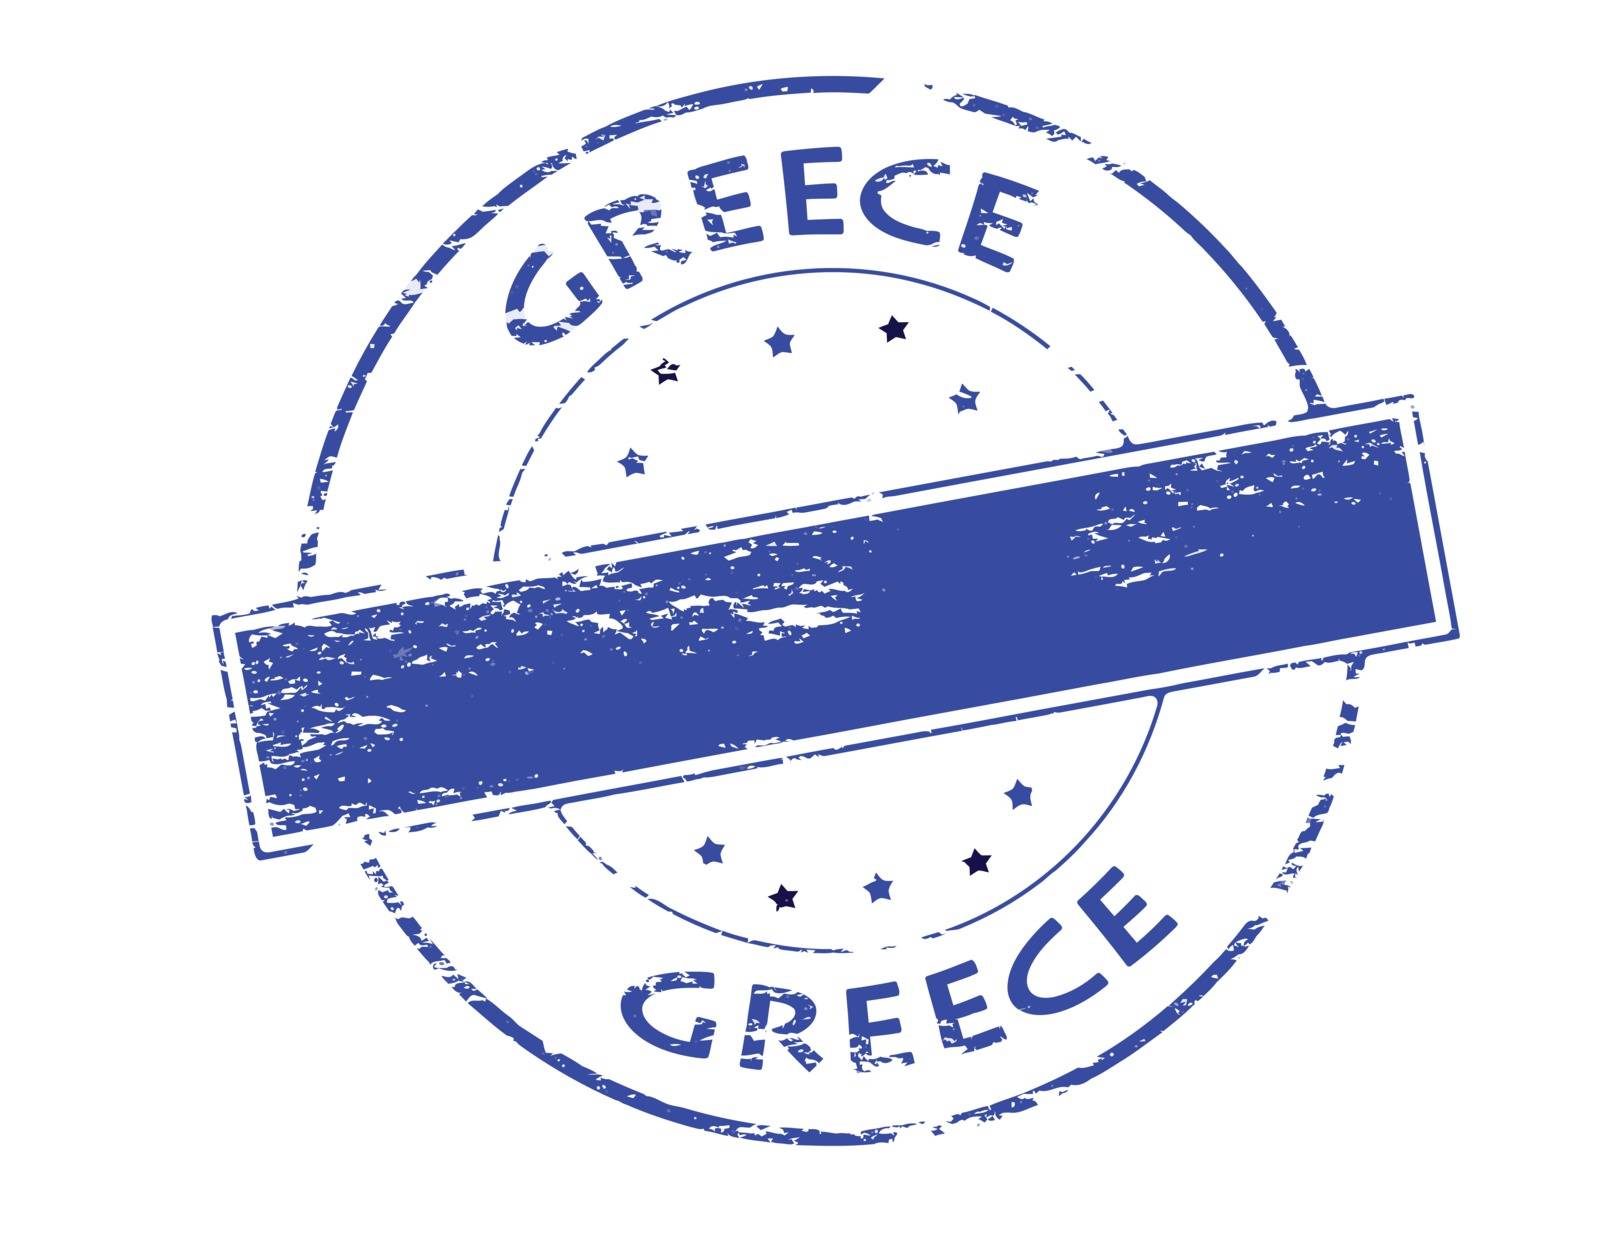 Rubber stamp with word Greece inside, vector illustration